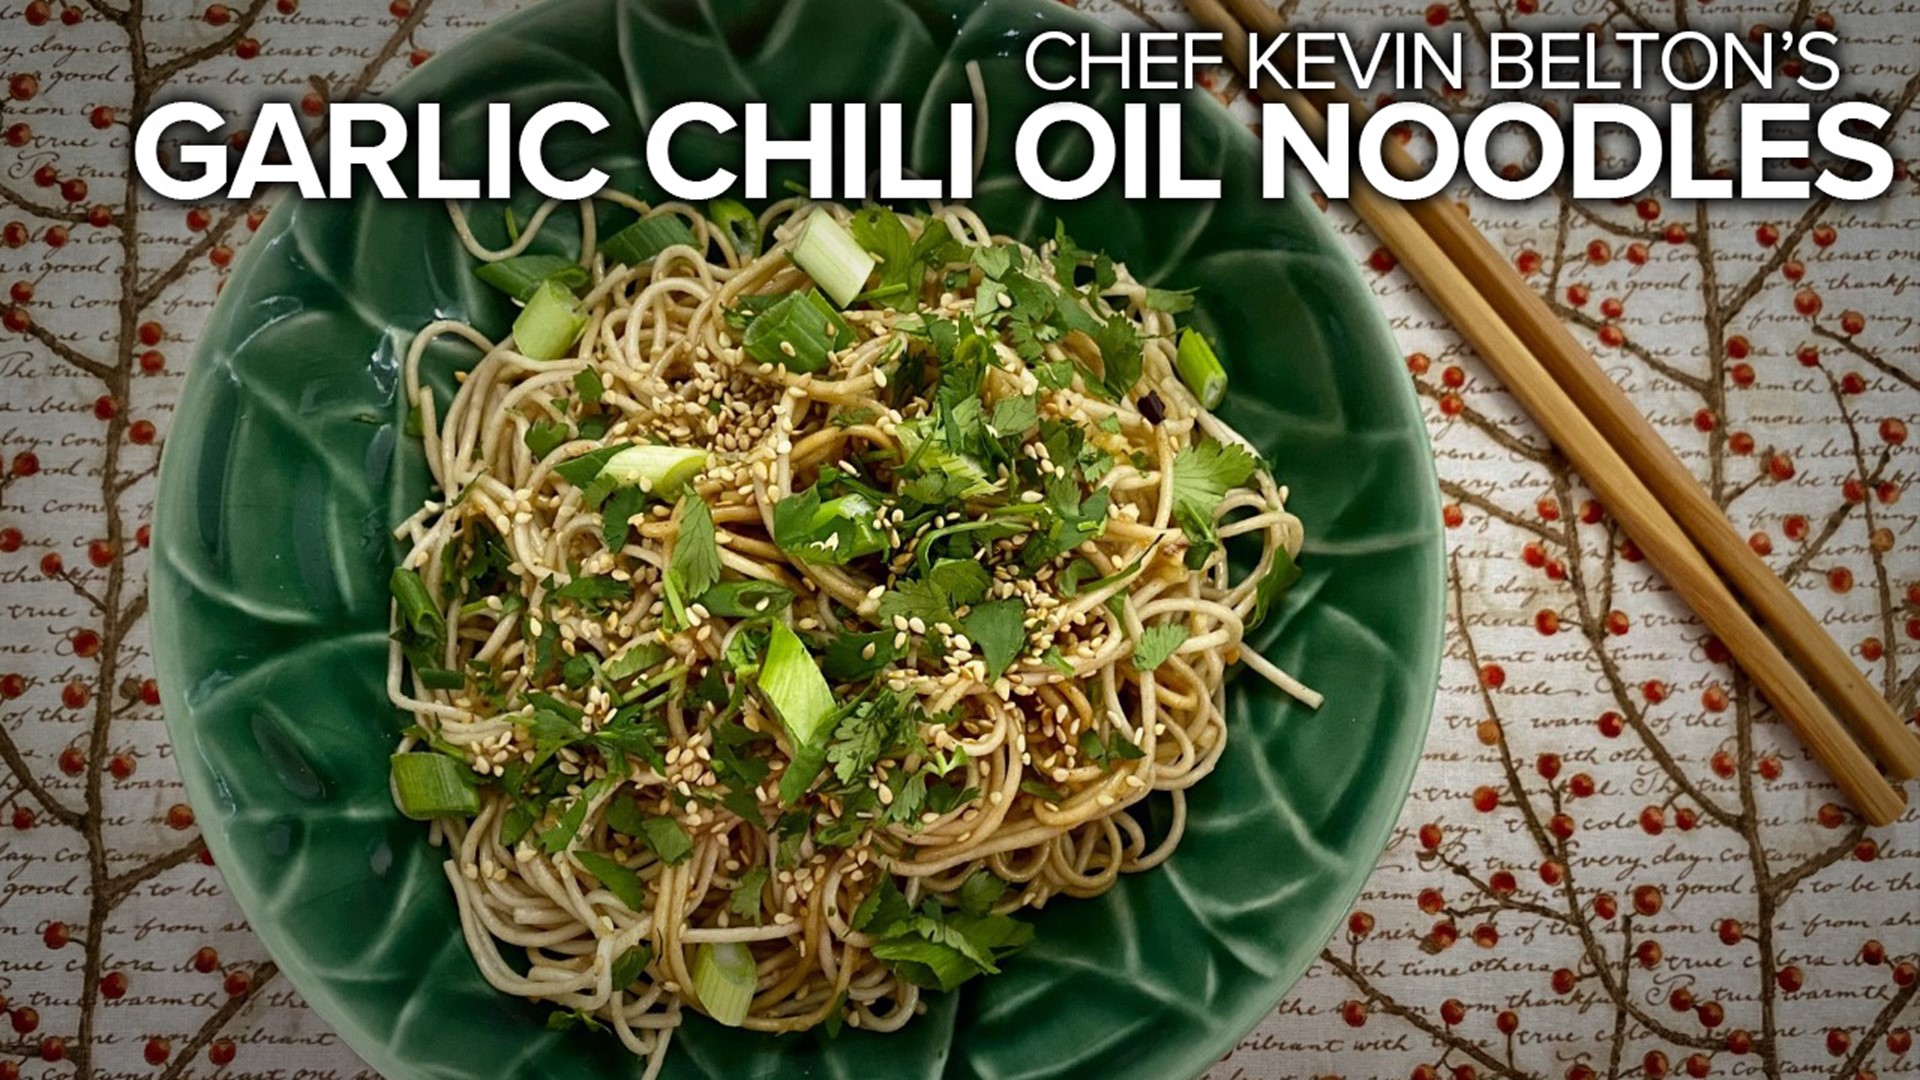 It's National Noodle Month! So, let's try something new with these garlic chili oil noodles.